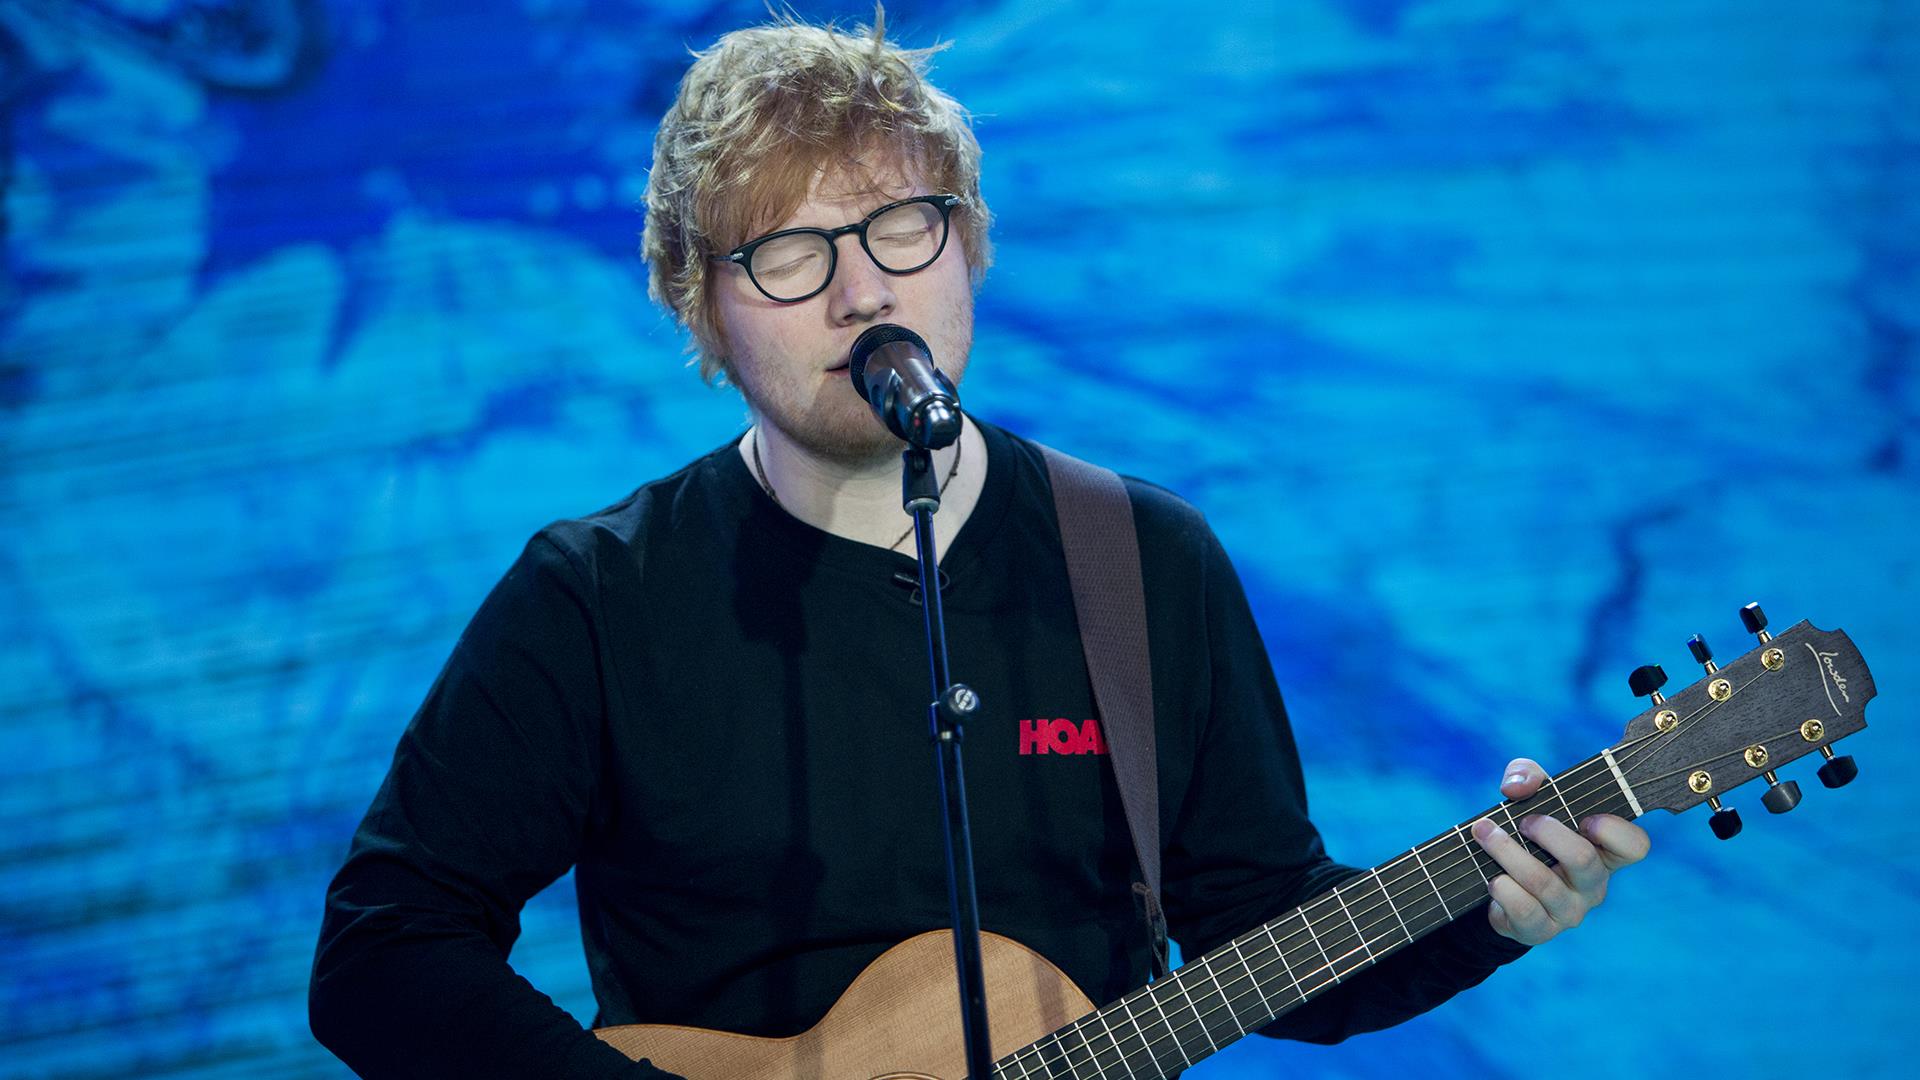 Watch Ed Sheeran perform 'Happier' live on TODAY